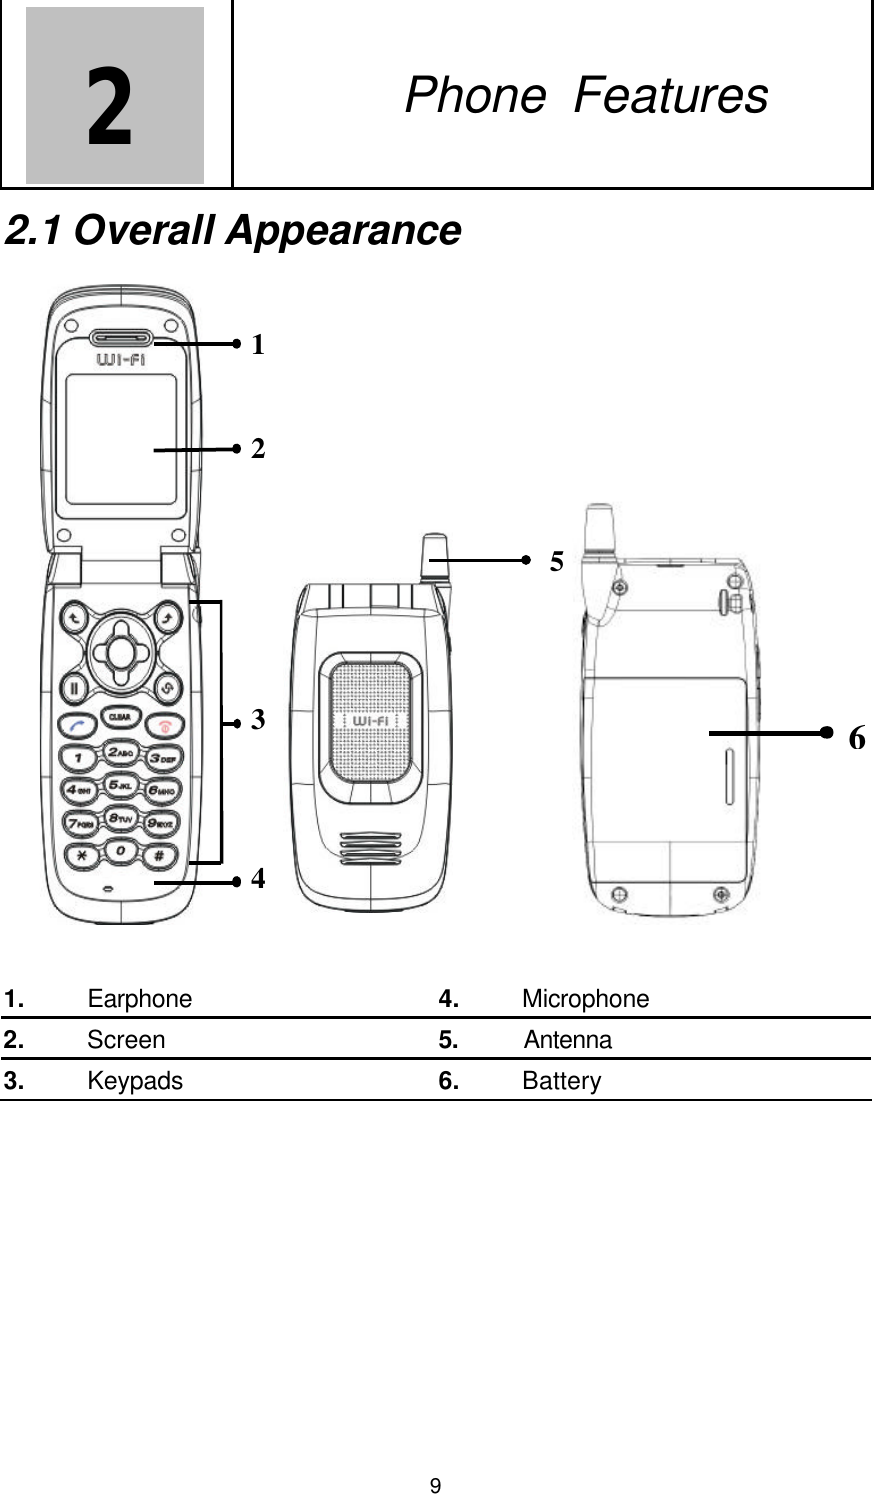  9 2   2. Phone Features 2.1 Overall Appearance  1 2 3 4  5  6   1.     Earphone 4.     Microphone 2.     Screen 5.     Antenna 3.     Keypads 6.     Battery  